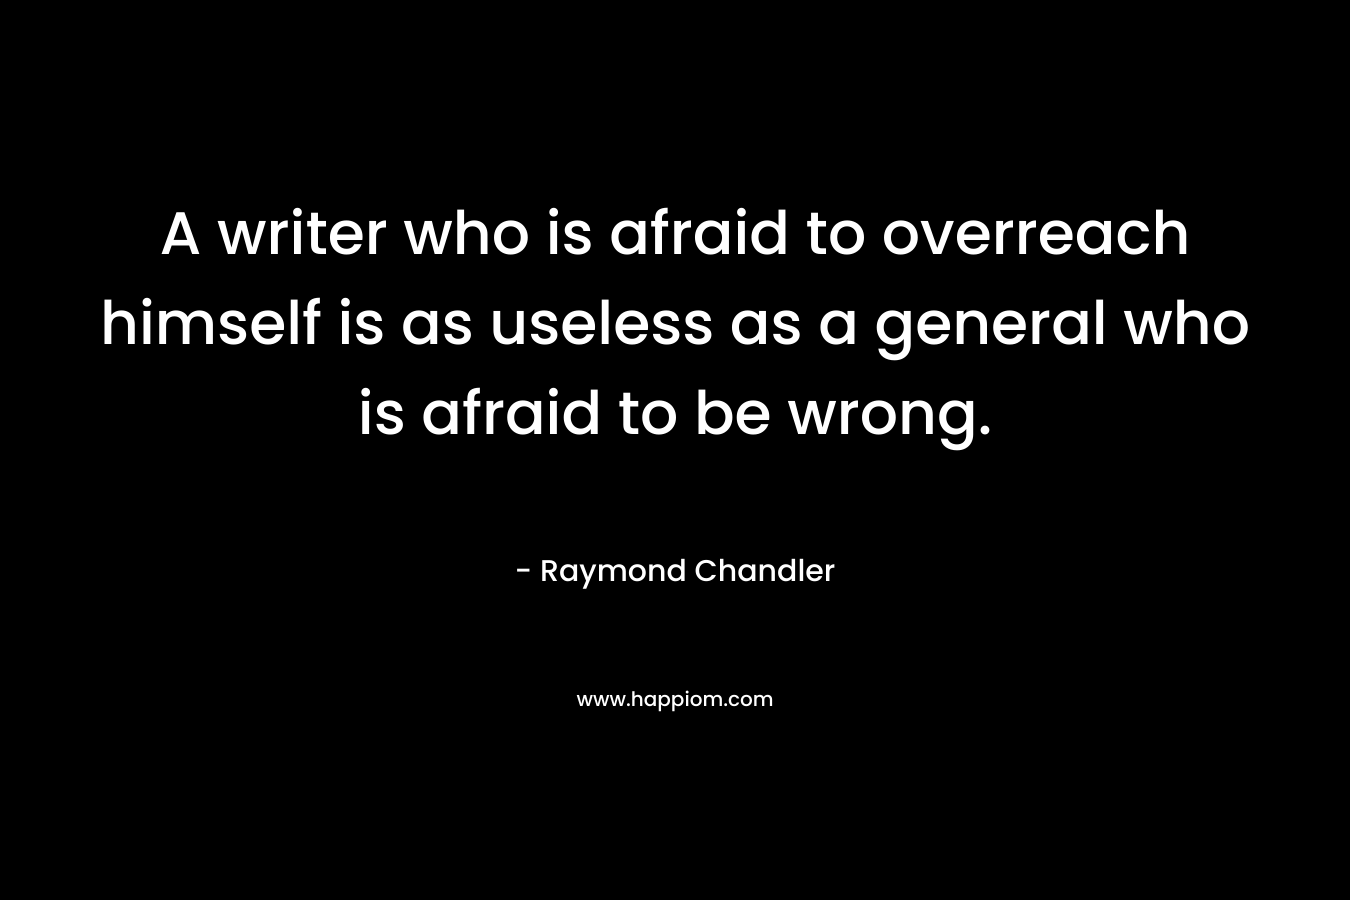 A writer who is afraid to overreach himself is as useless as a general who is afraid to be wrong.